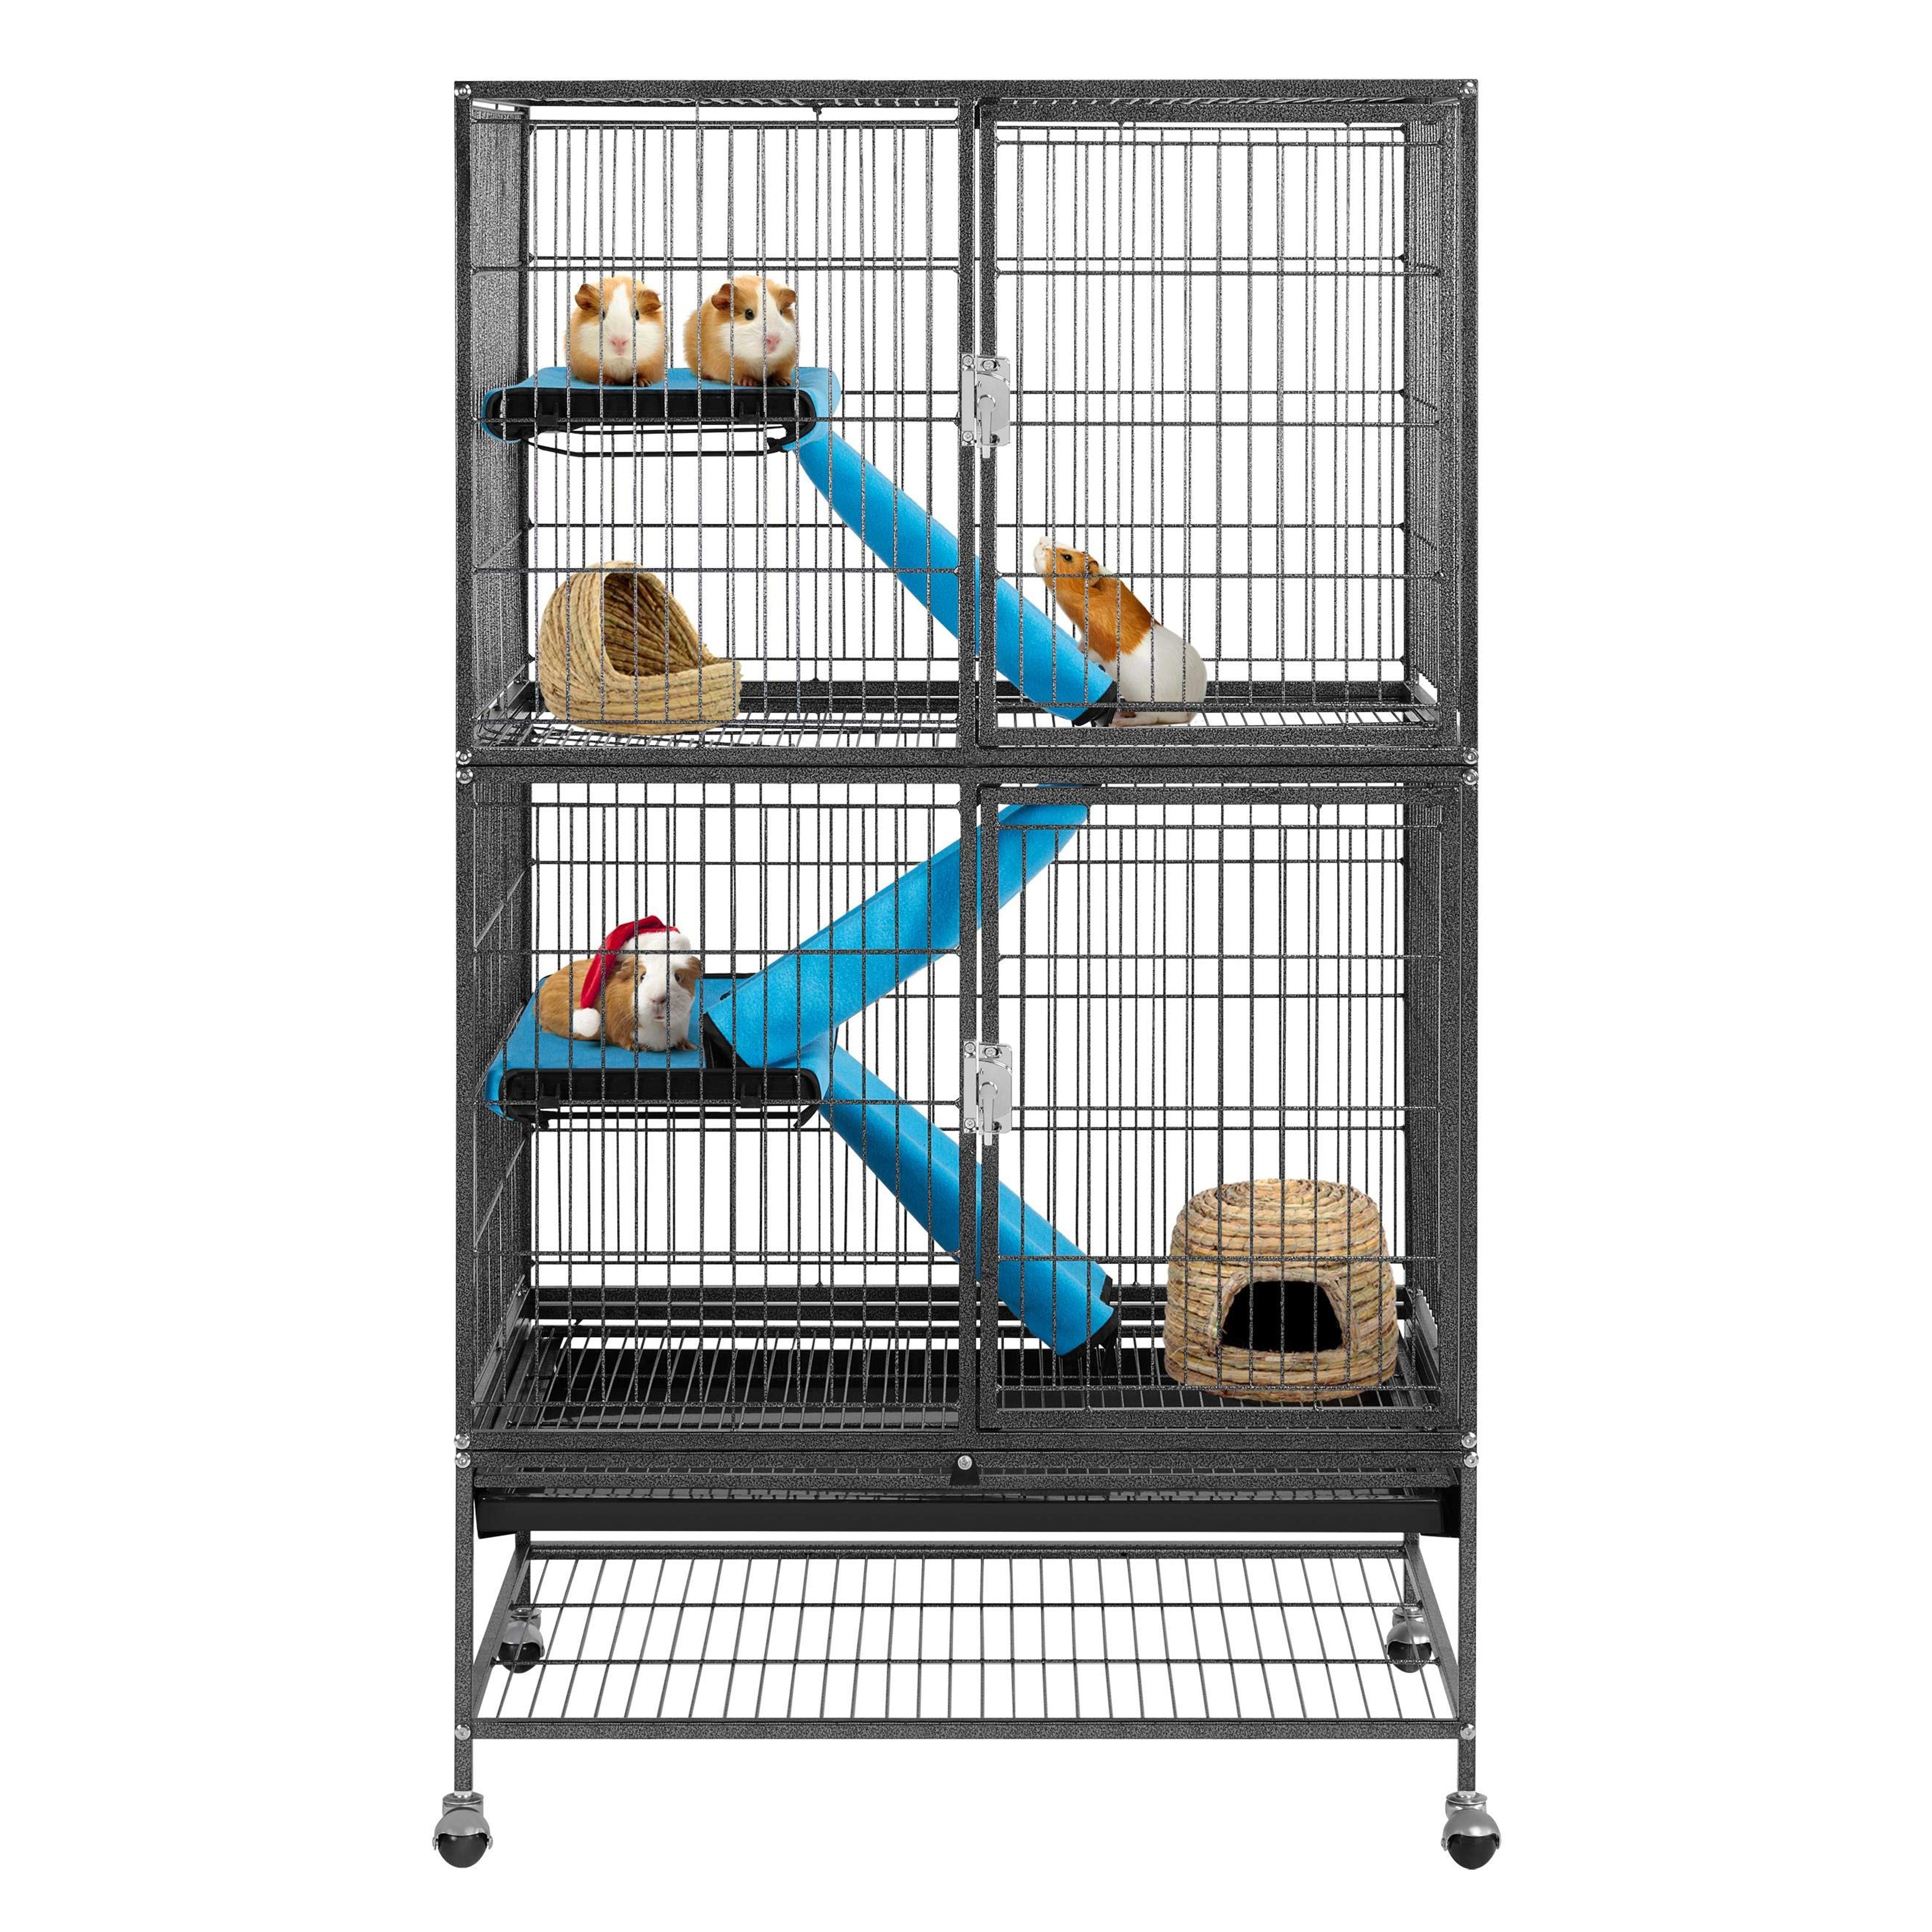 Yaheetech Rolling 2-Story Ferret Cage Small Animal Cage for Chinchilla Adult Rats Metal Critter Nation Cage w/ 2 Removable Ramps/Platforms Black